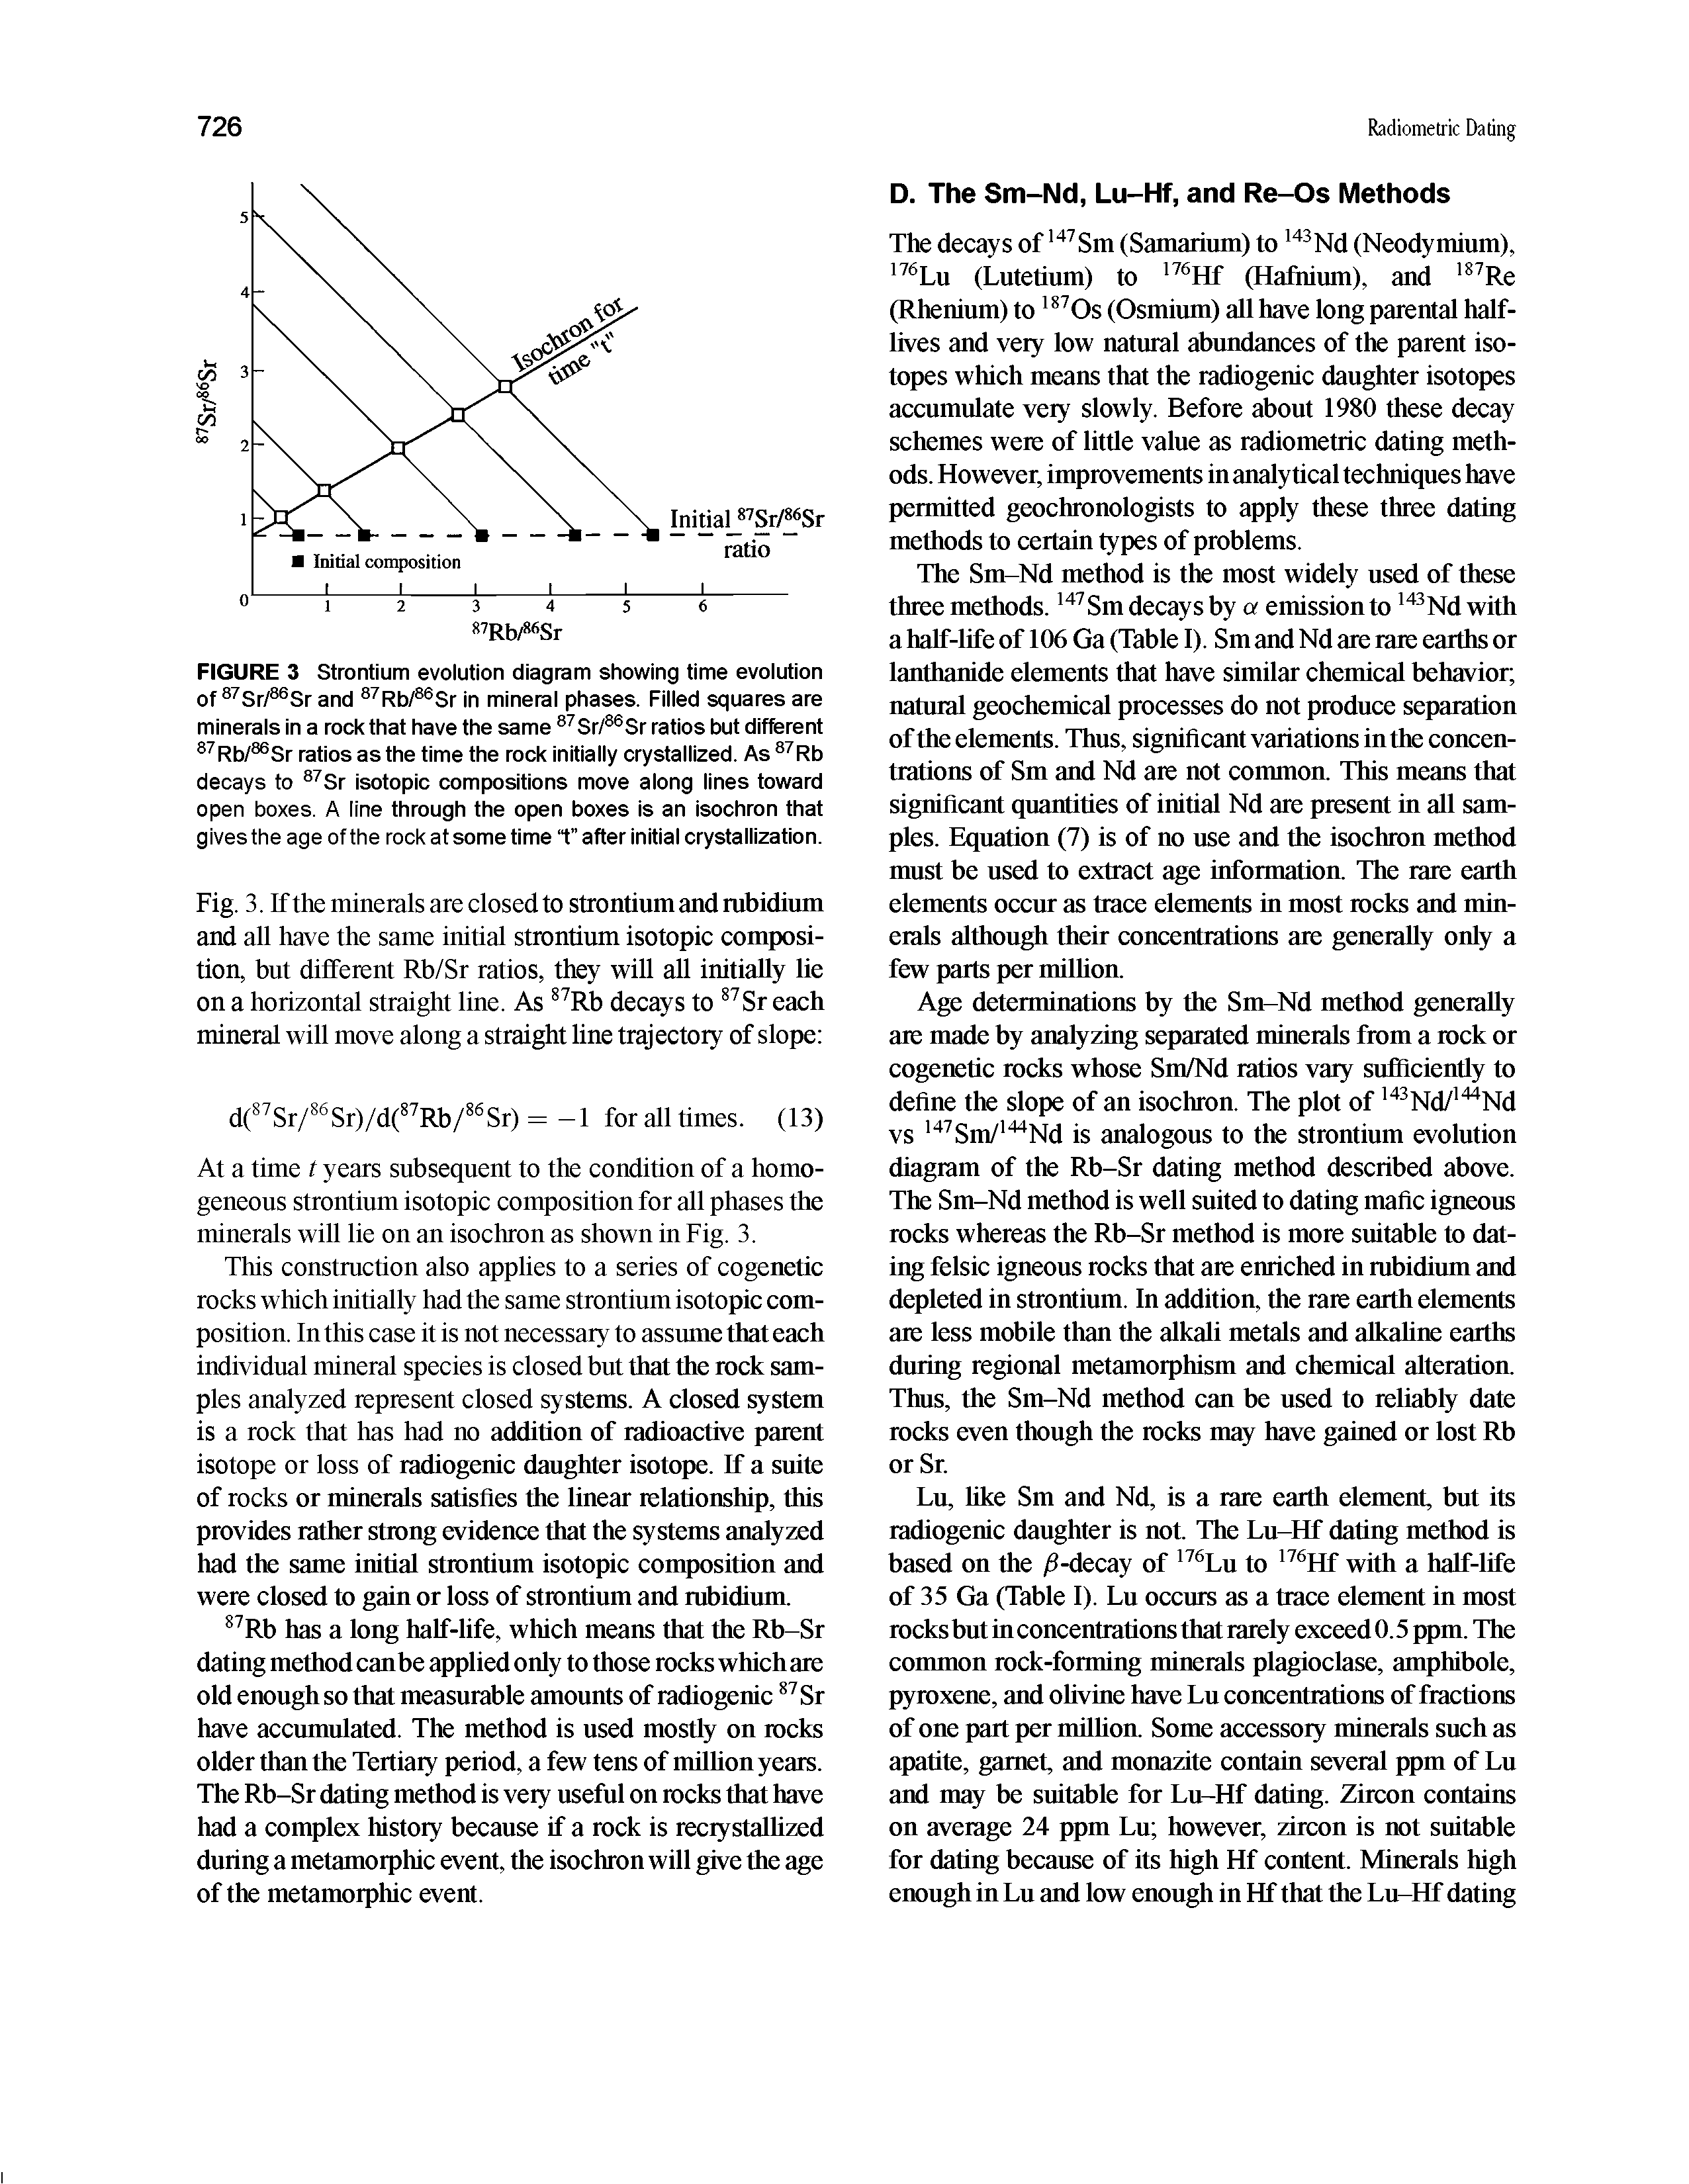 Fig. 3. If the minerals are closed to strontium and rubidium and all have the same initial strontium isotopic composition, but different Rb/Sr ratios, they will all initially lie on a horizontal straight line. As Rb decays to Sr each mineral will move along a straight line trajectory of slope ...